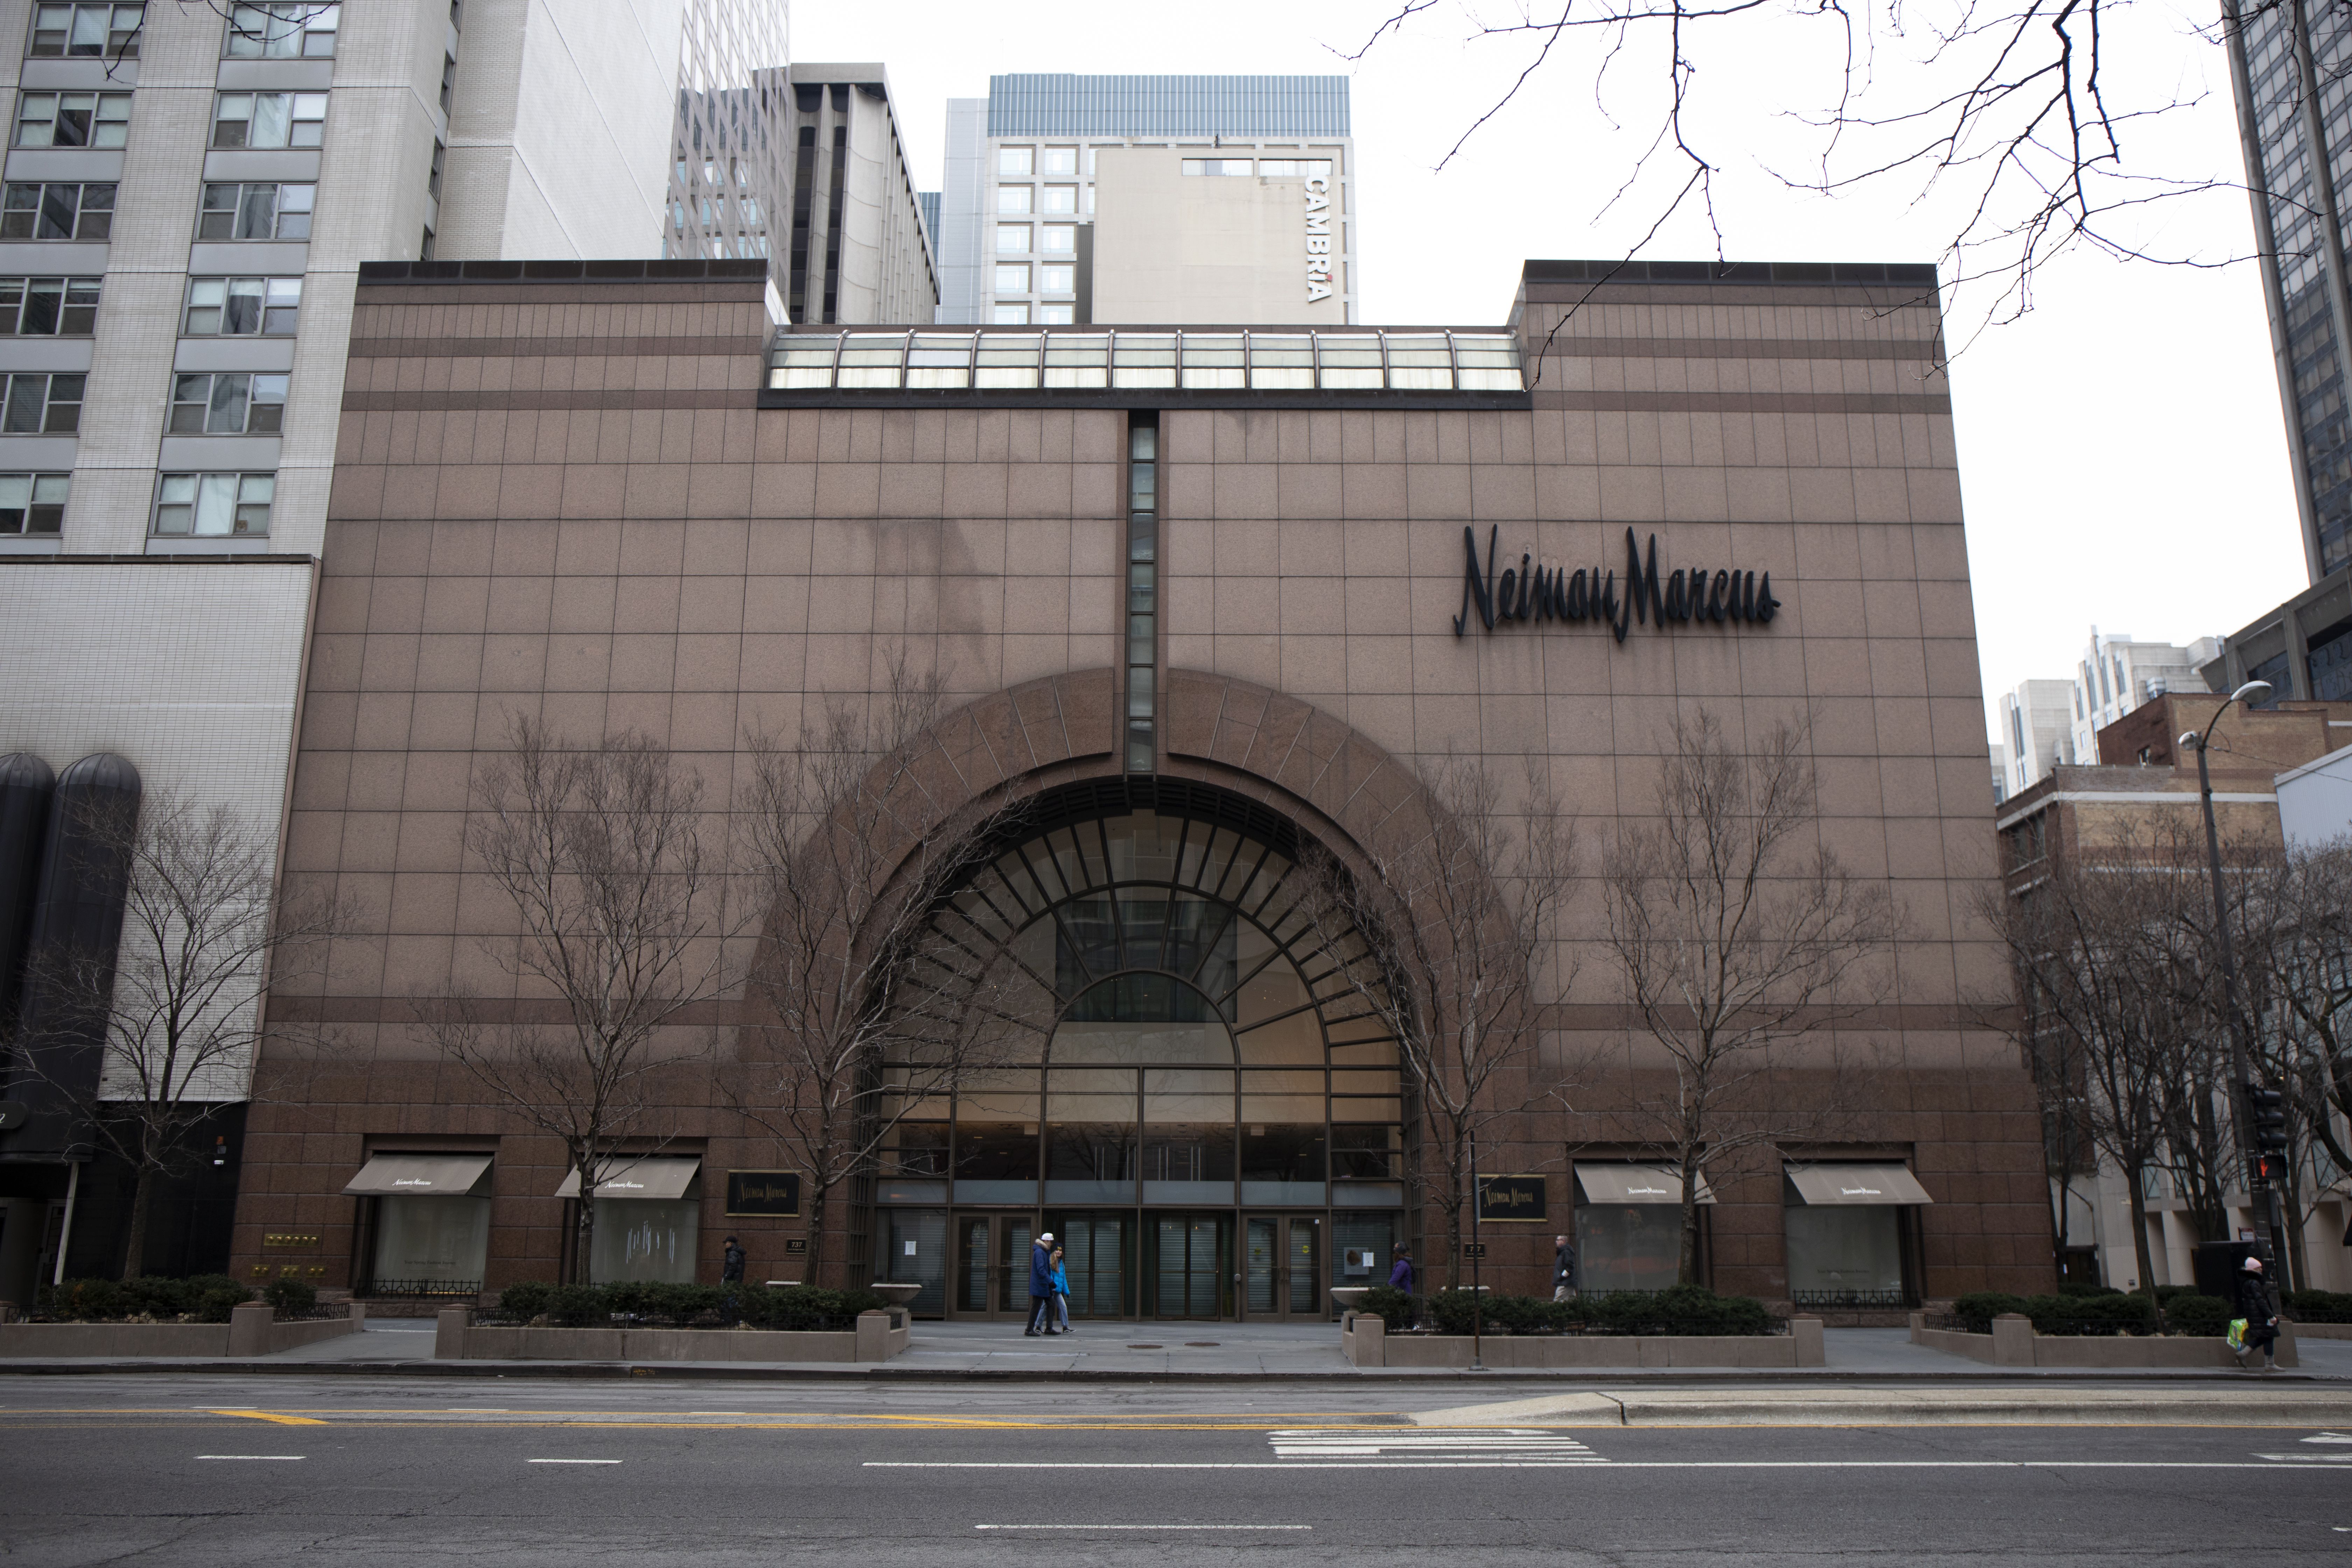 Neiman Marcus Is Closing 22 Store Locations for Good